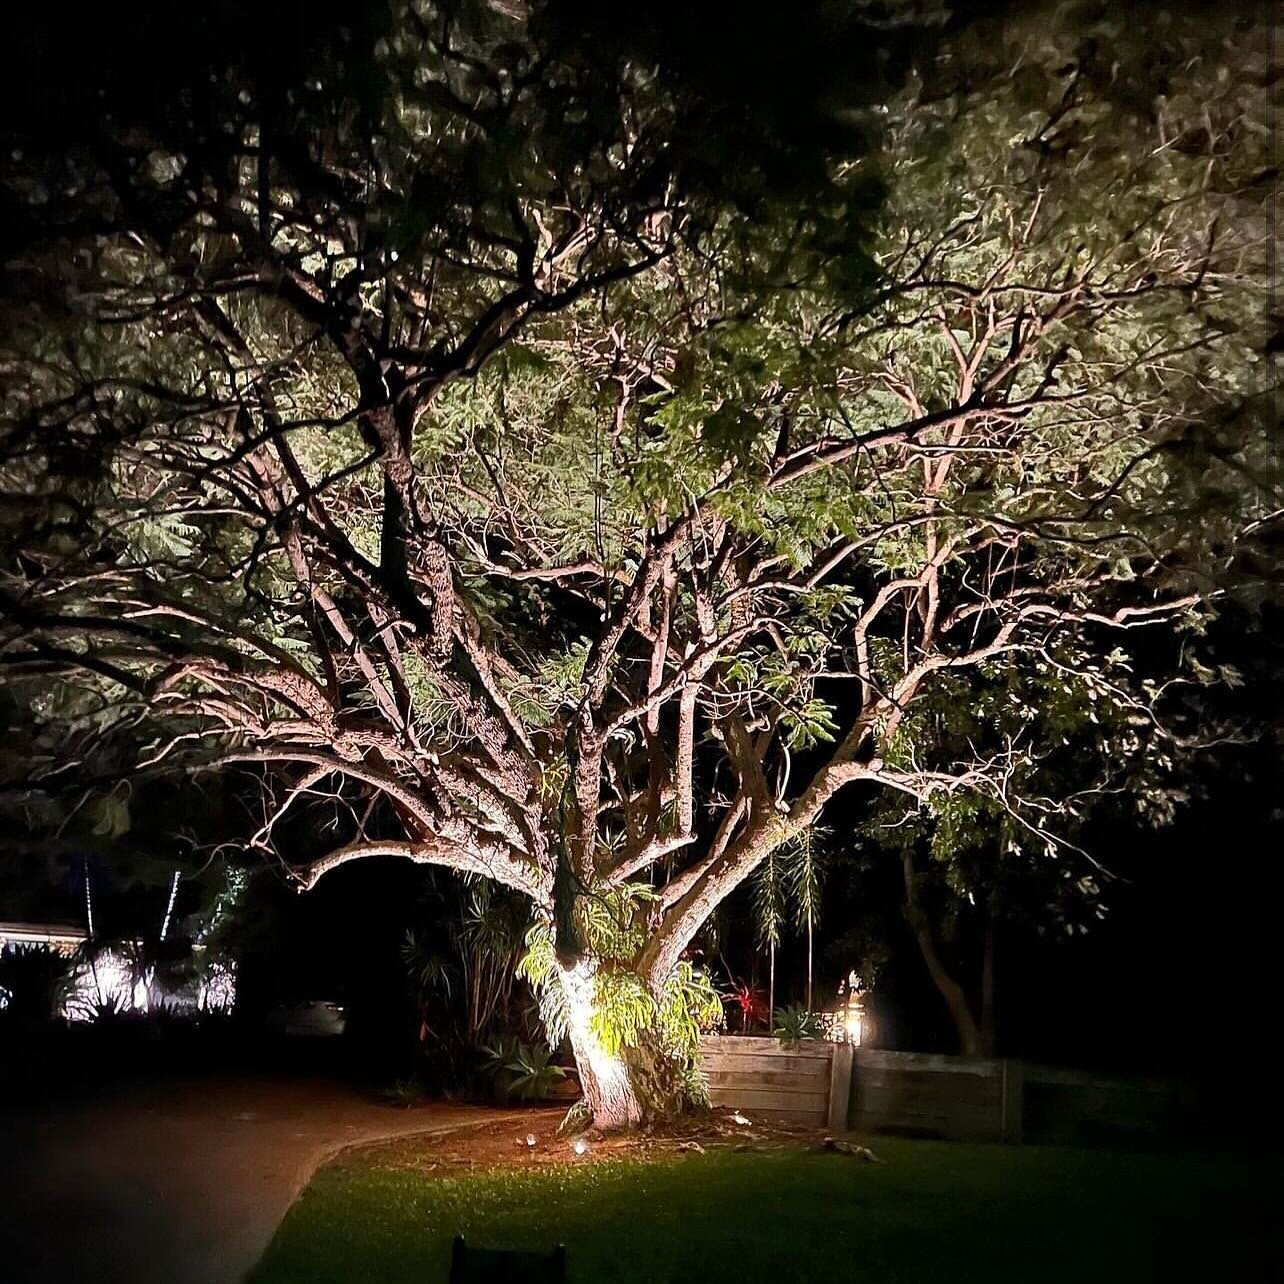 Our client had been wanting to light up this beautiful Jacaranda for many years

We installed four 10w LED garden spot lights that are sensor operated - giving plenty of light for the incredible giant tree

Lighting supplied by @rapid_led 

For a fre